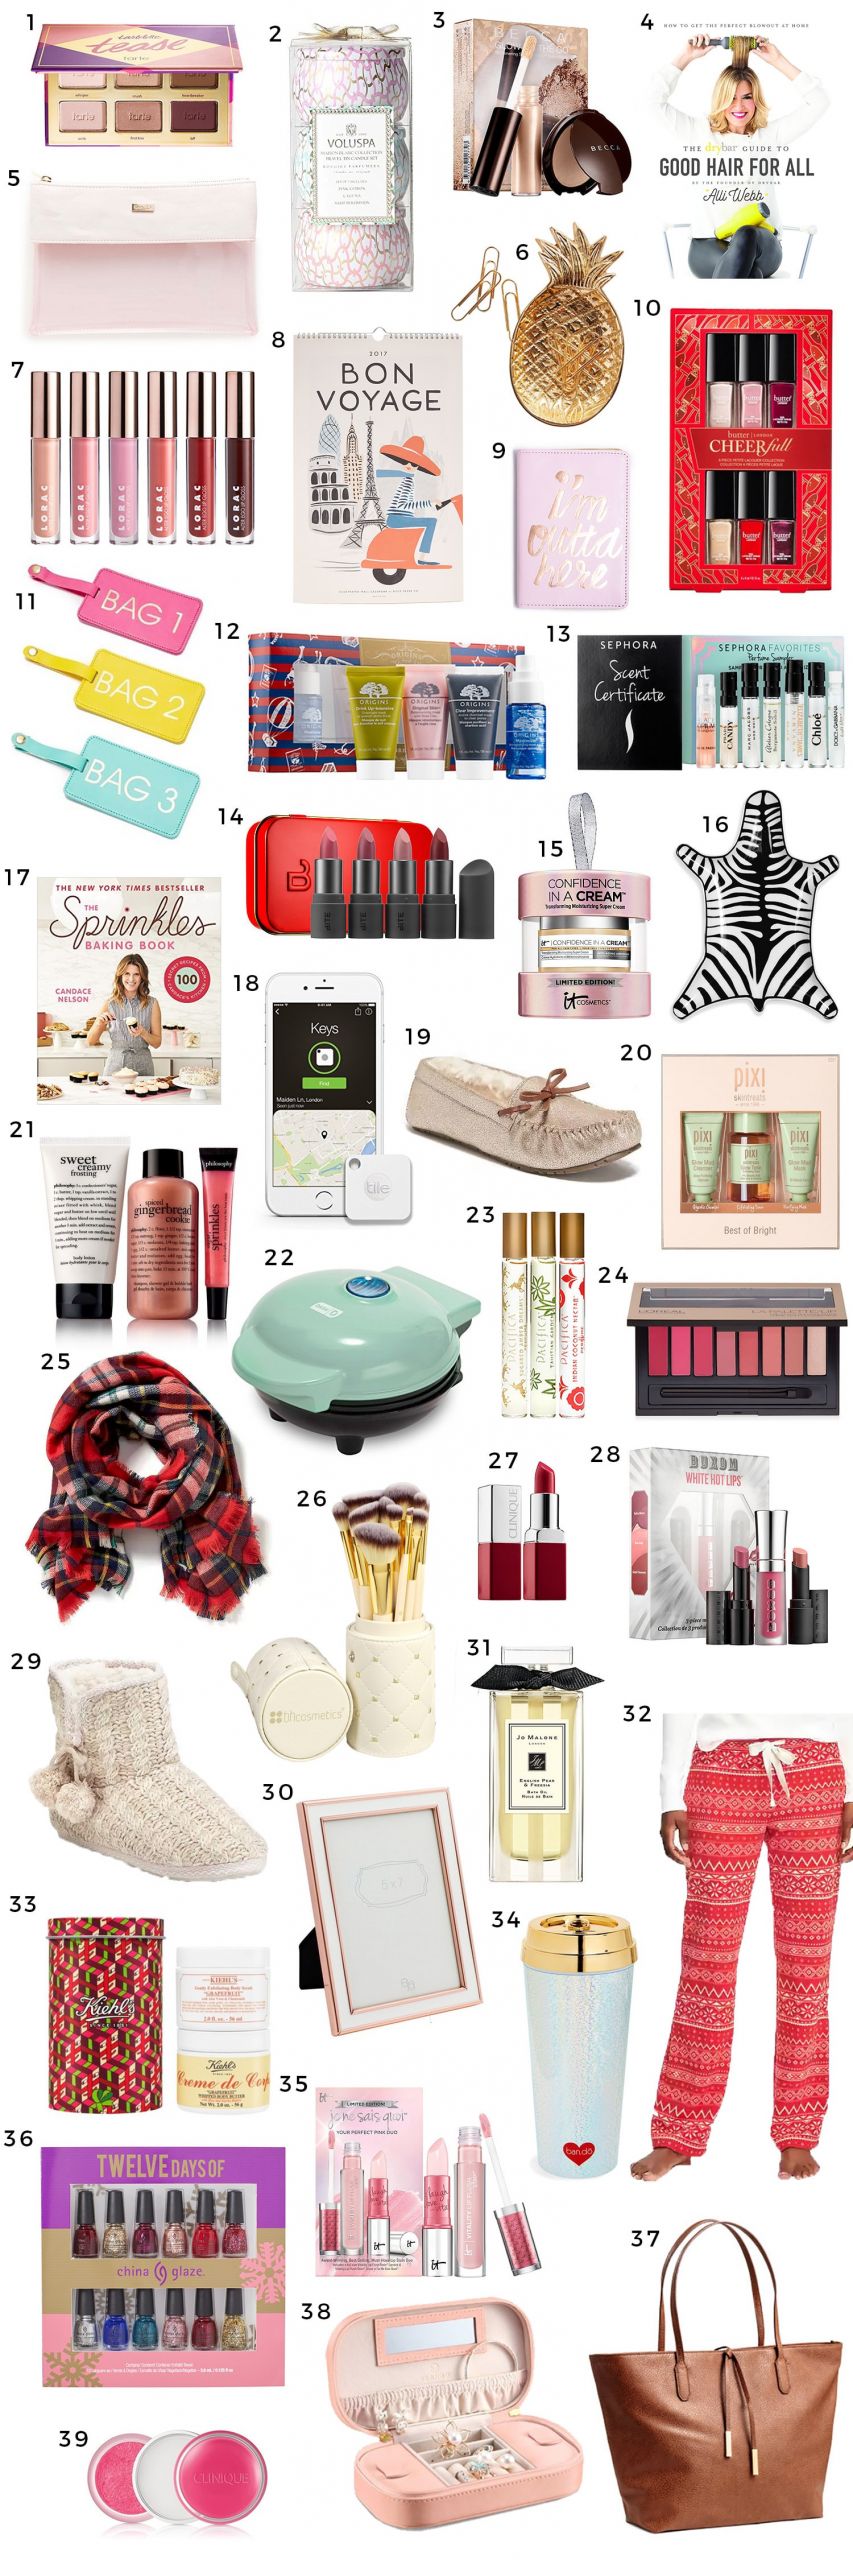 Best Christmas Gifts
 The Best Christmas Gift Ideas for Women under $25